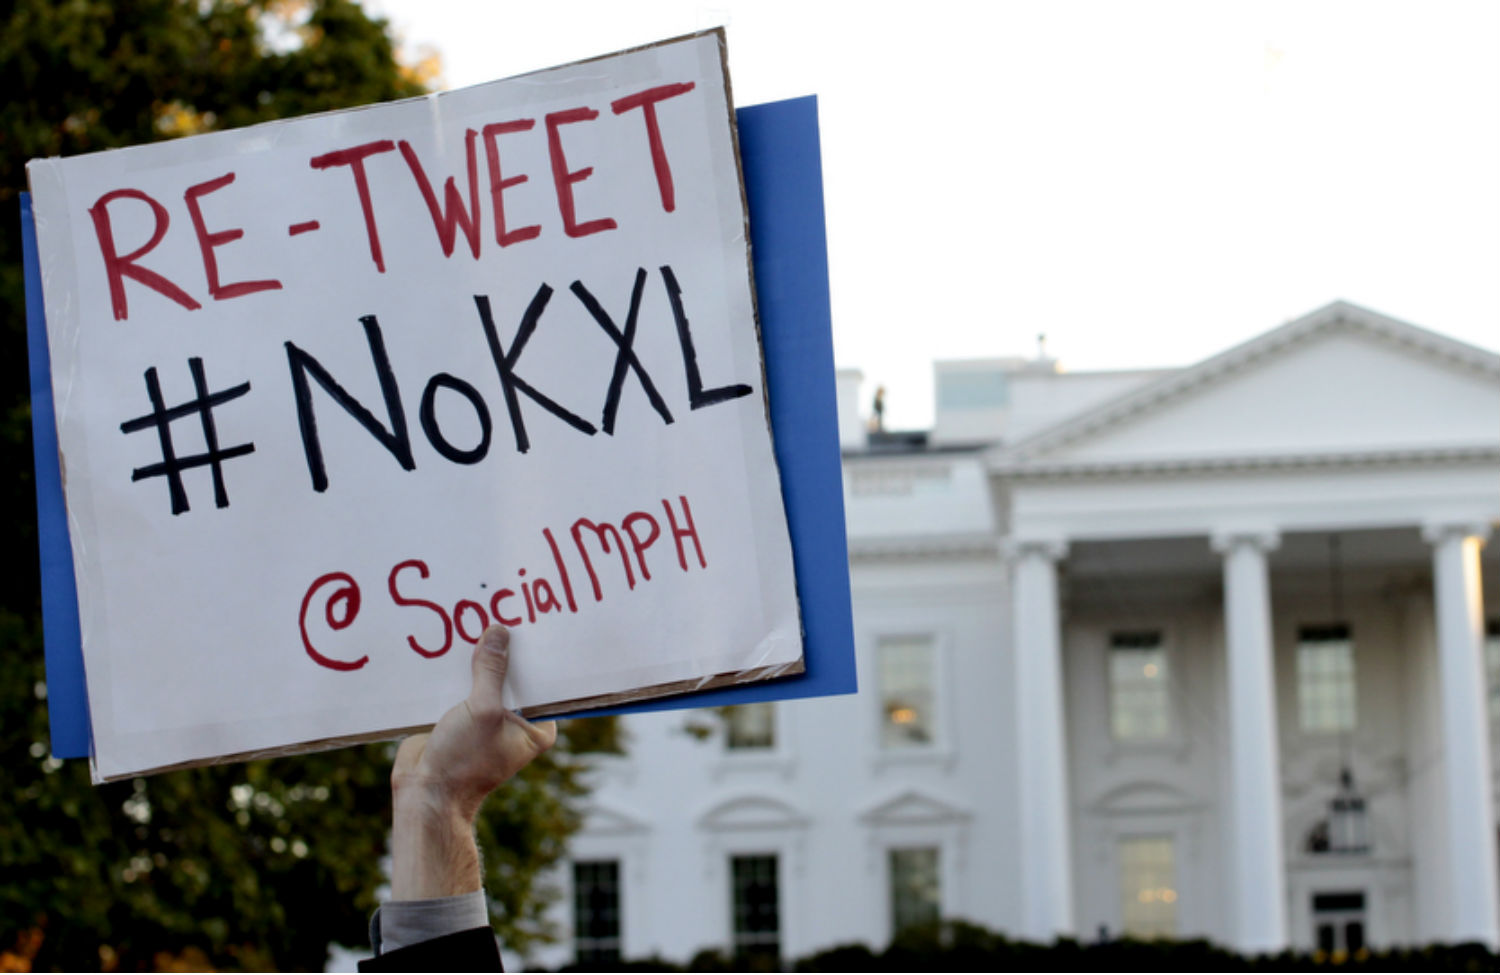 Hundreds of Actions Are Planned to Protest Keystone XL